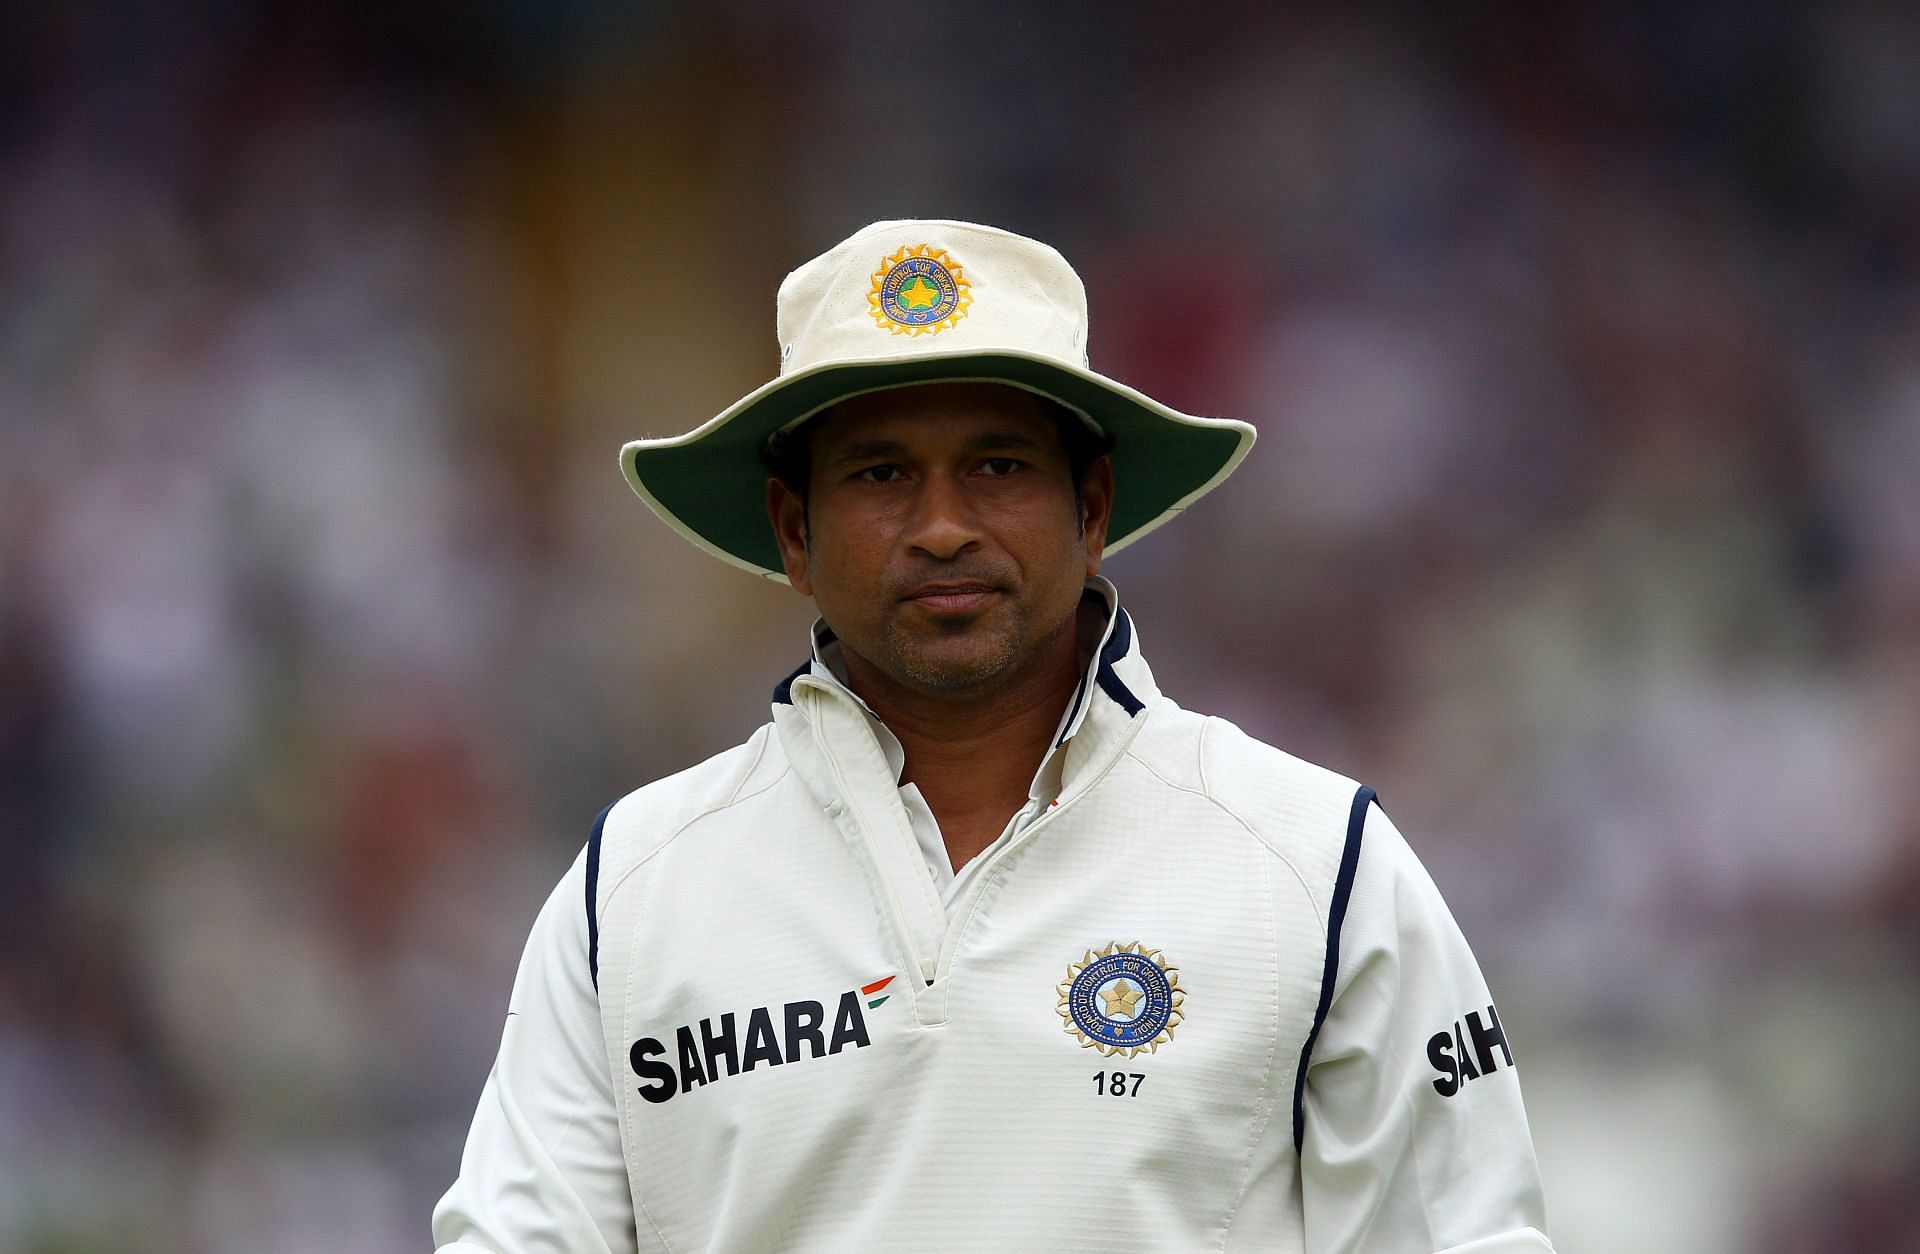 Sachin Tendulkar represented the Indian team in 200 Test matches. (Image: Getty)